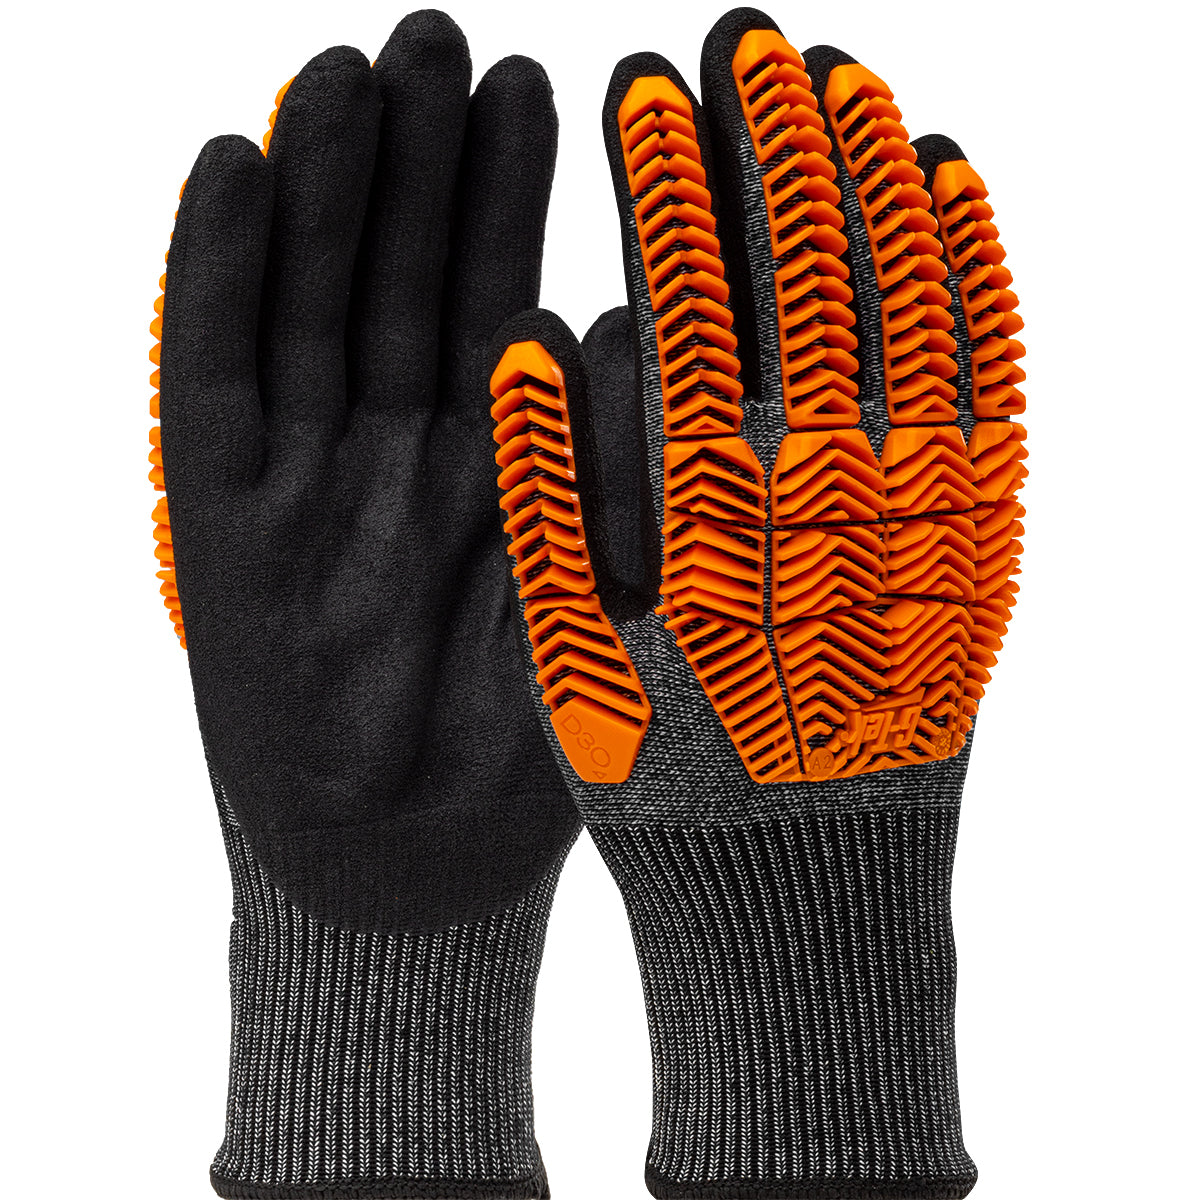 G-Tek® PolyKor® Glove with D3O® Impact Protection and Nitrile MicroSurface Coated Palm & Fingers